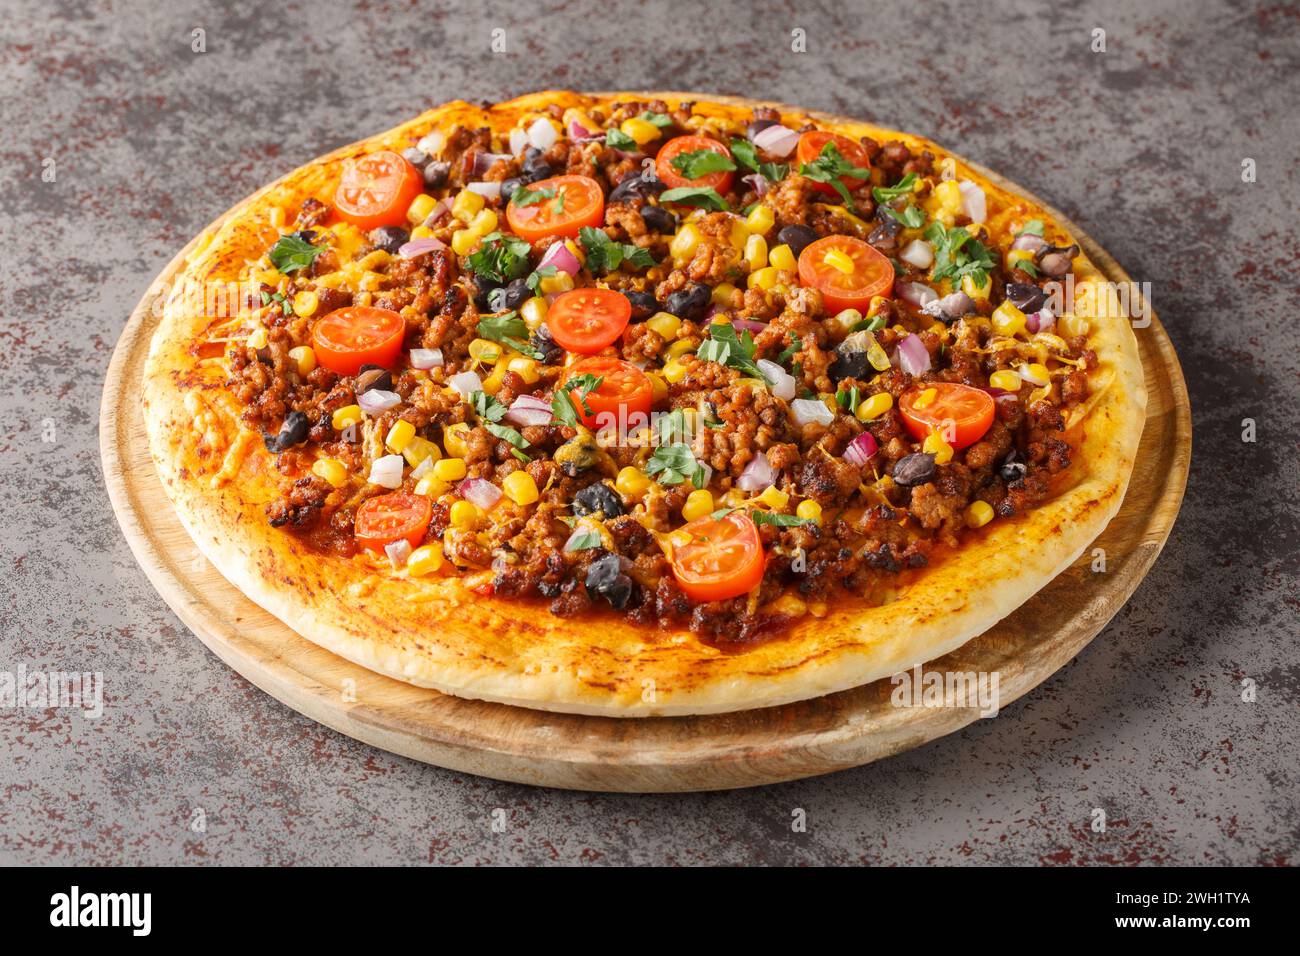 Homemade Tex Mex pizza with ground beef, vegetables, cheddar cheese and Mexican spices close-up on a wooden board on the table. Horizontal Stock Photo